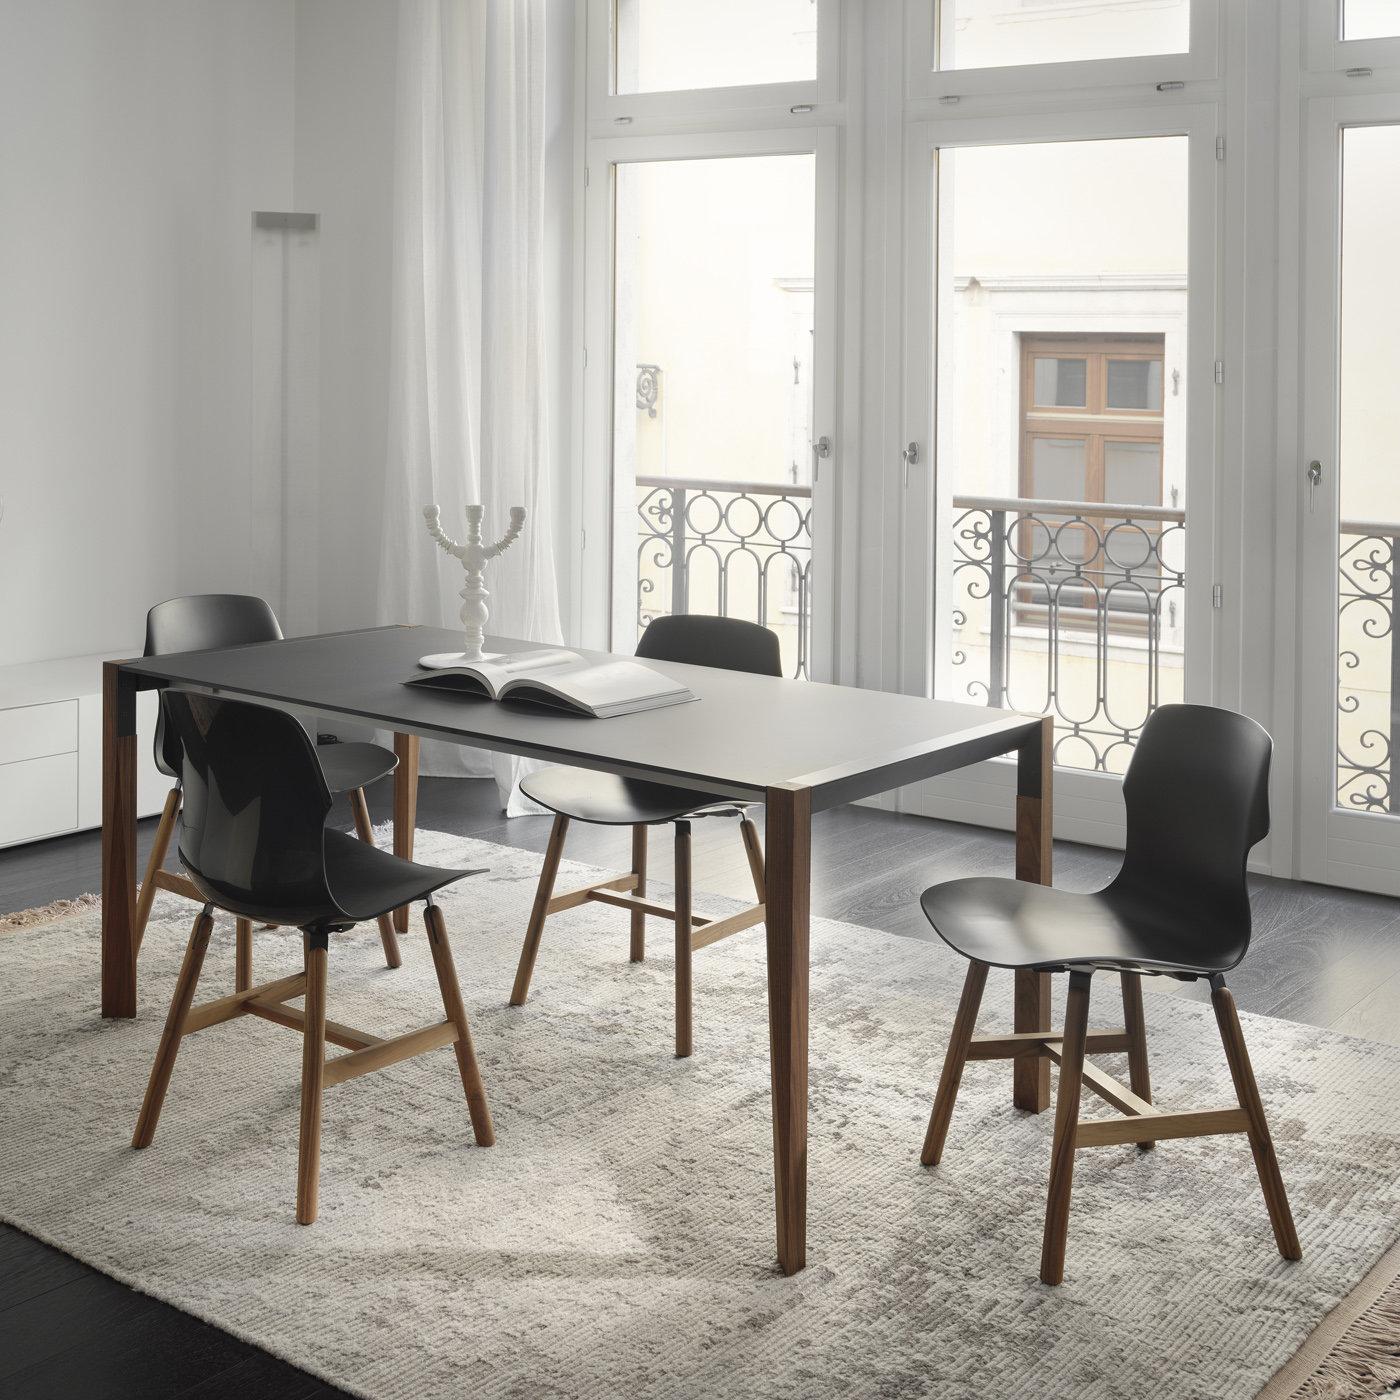 A simple and functional design is the distinctive feature of this modern and versatile table that is extendable to reach three different lengths (in cm): 125, 165 and 205. Resting on solid wood legs, top and extensions are made of Fenix, a new